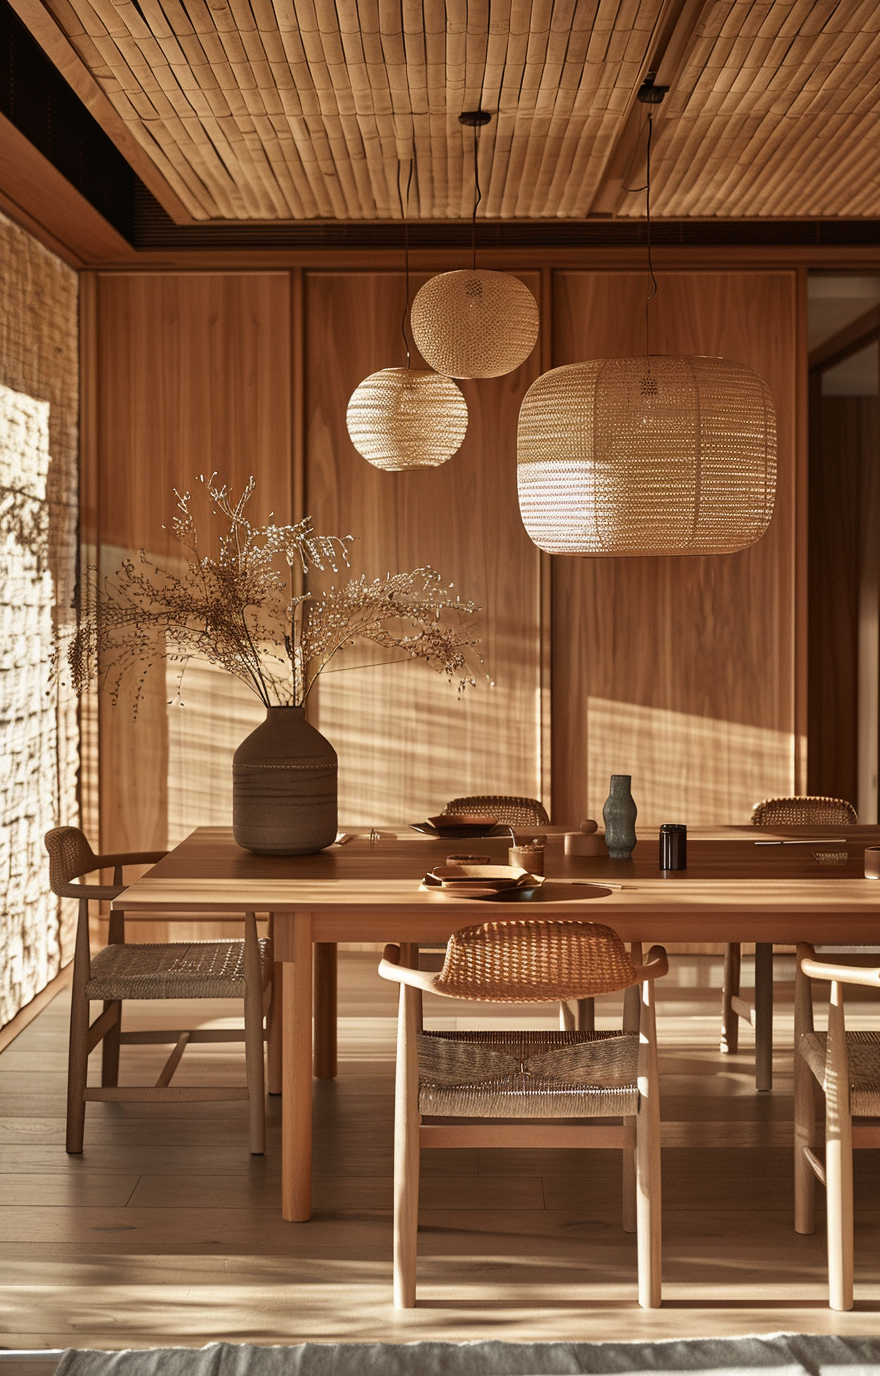 Japanese dining room fusion showcasing a mix of modern and traditional elements